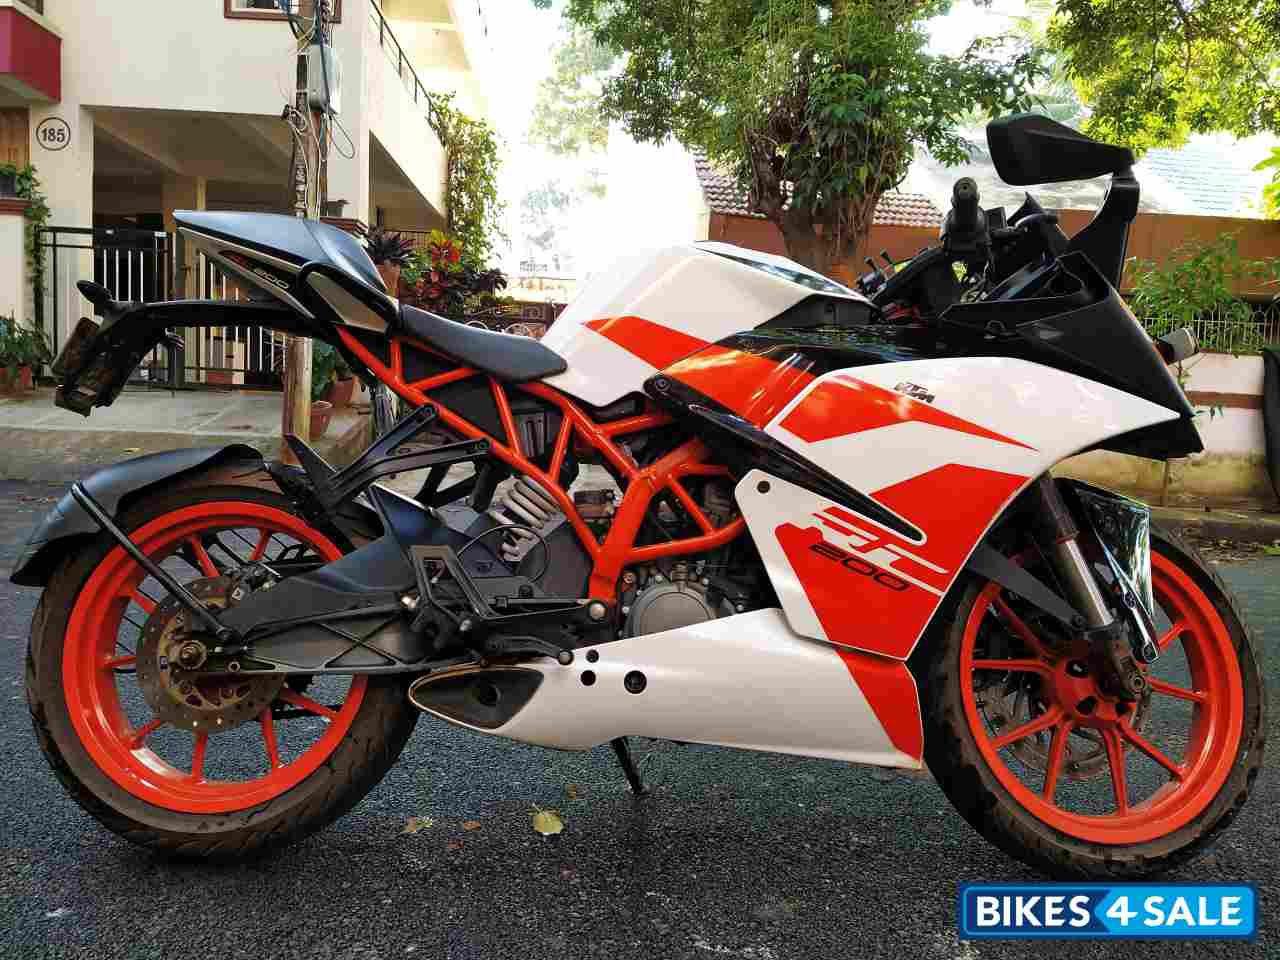 Used 2017 model KTM RC 200 for sale in Bangalore. ID 299673 - Bikes4Sale